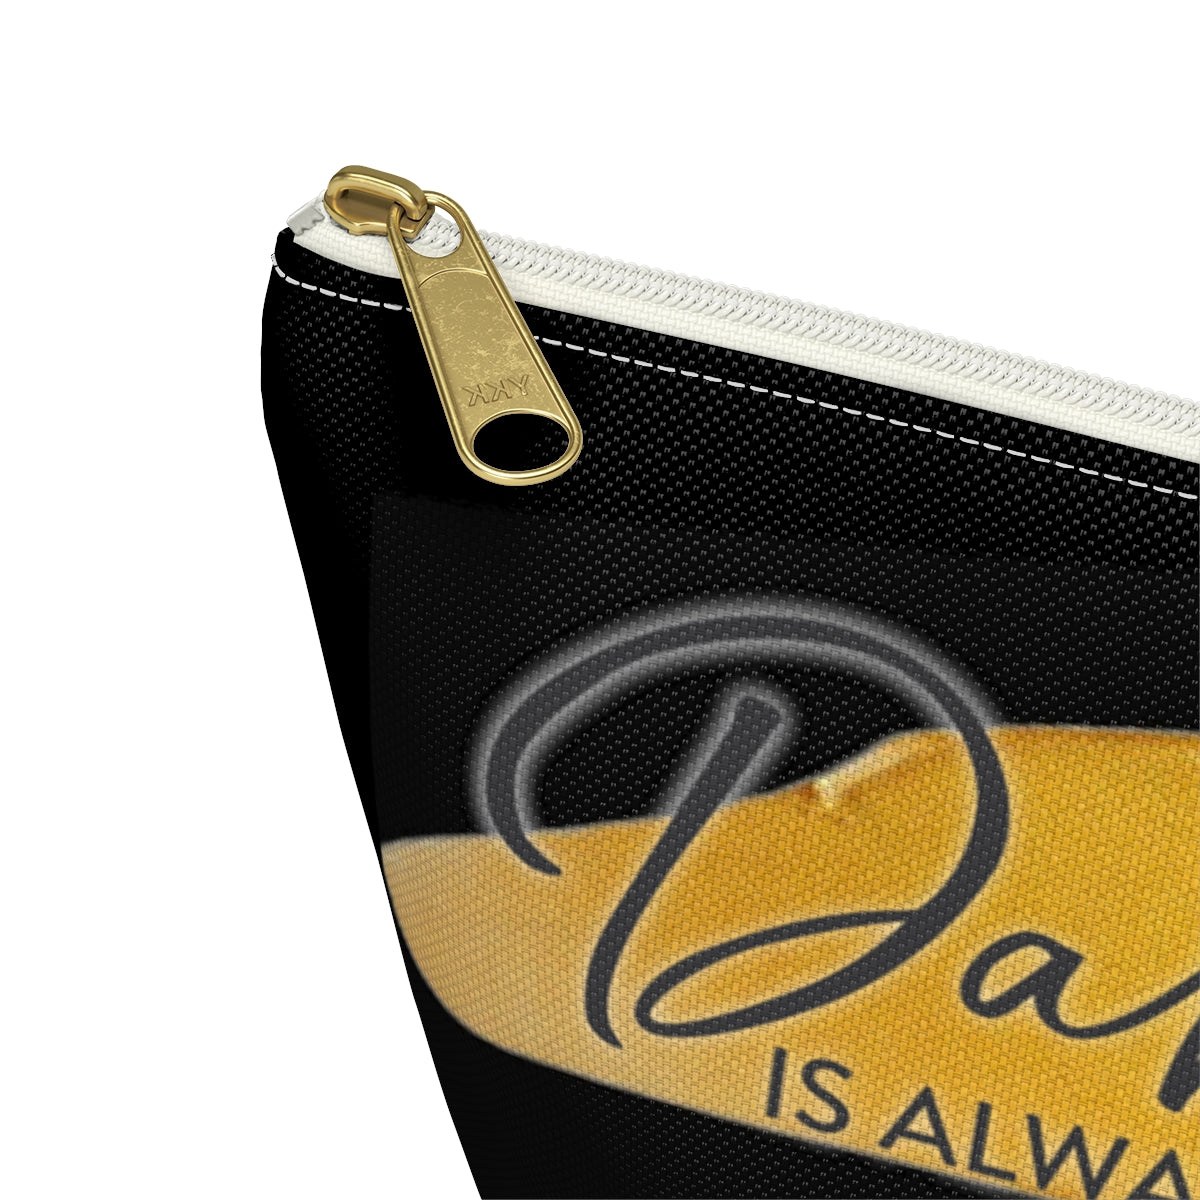 Accessory Pouch - Dabbling is Always the Answer